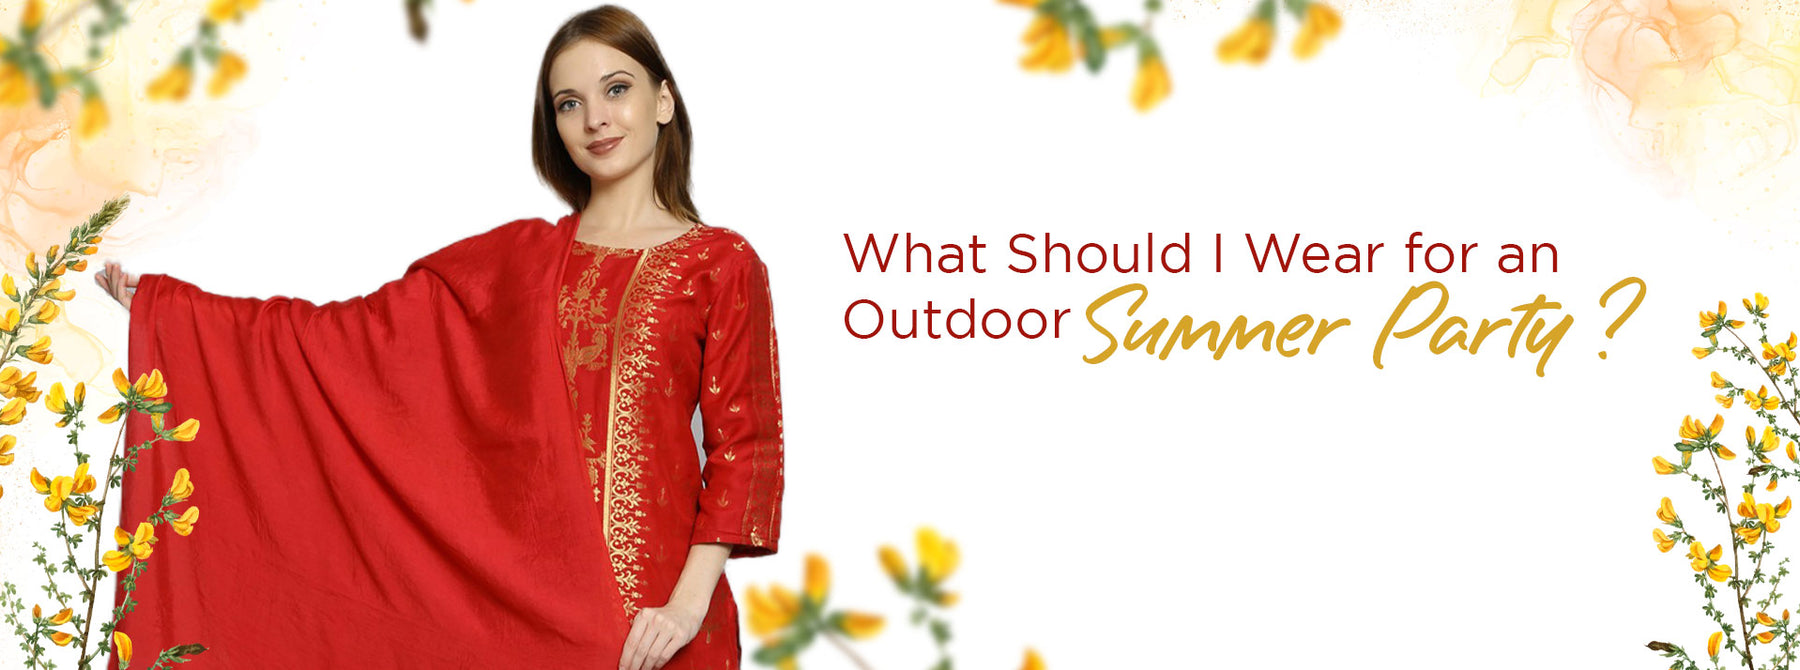 What Should I Wear for an Outdoor Summer Party?